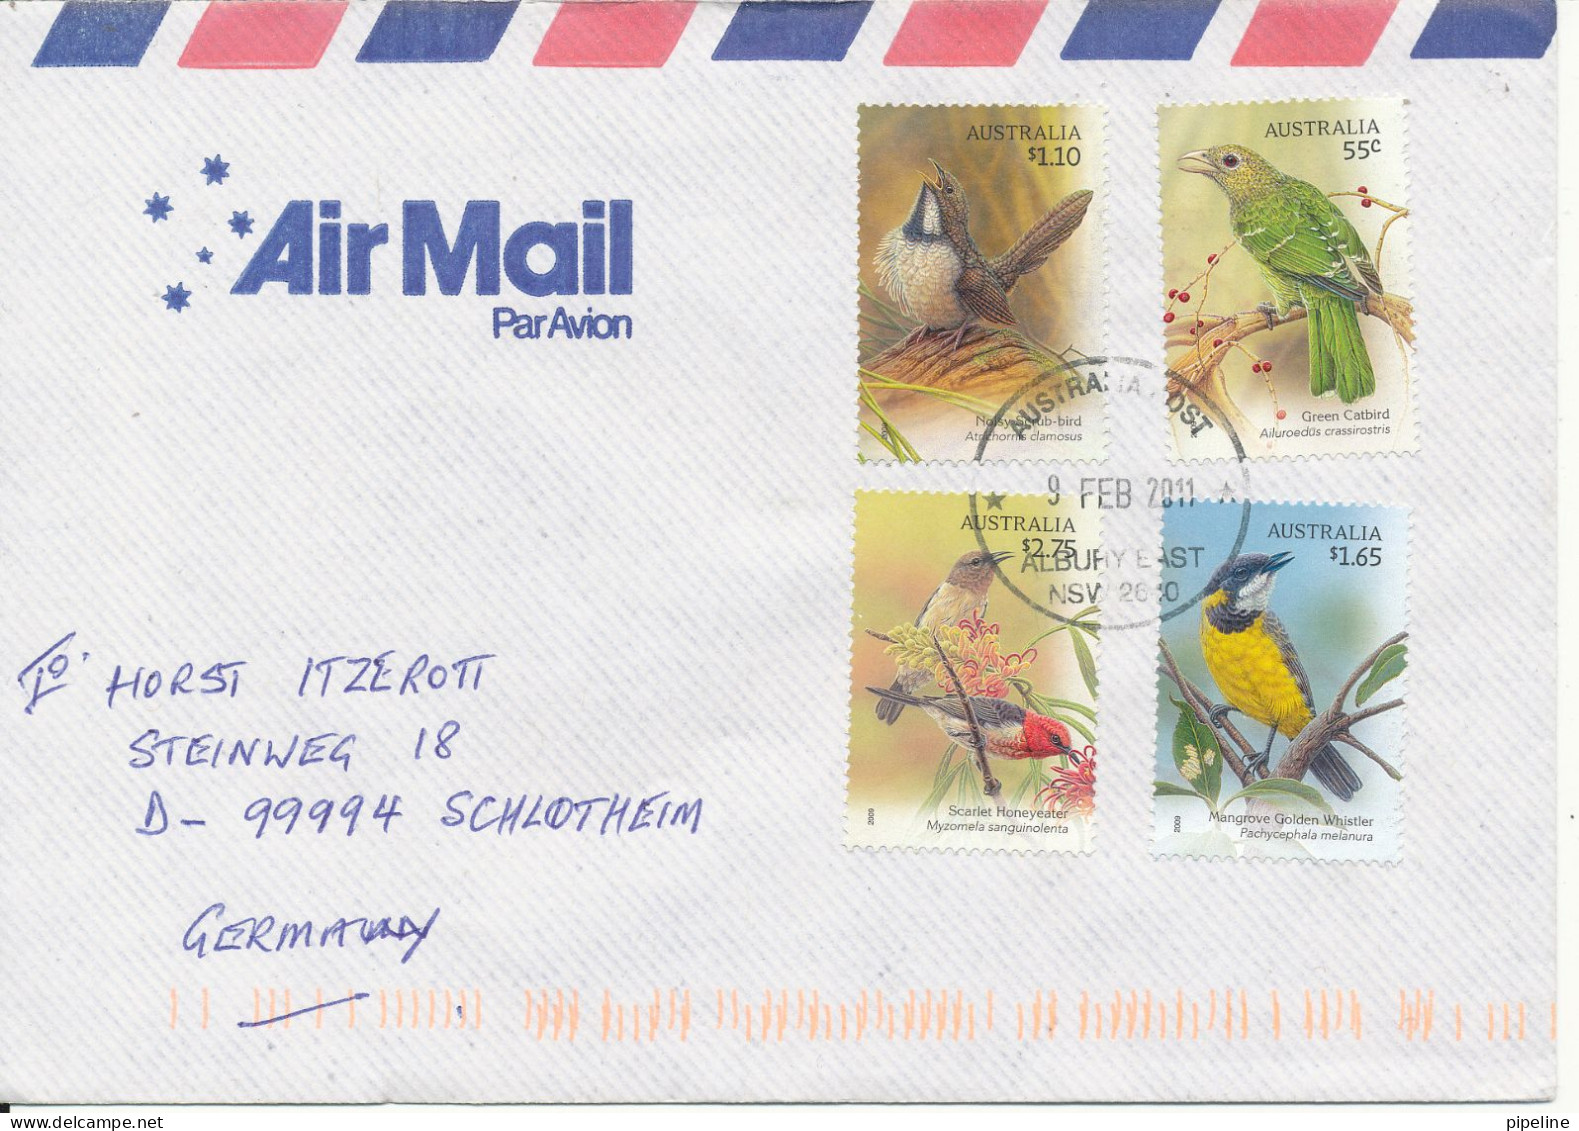 Australia Air Mail Cover Sent To Germany 9-2-2011 With Complete Set Of 4 BIRDS Very Nice Cover - Covers & Documents